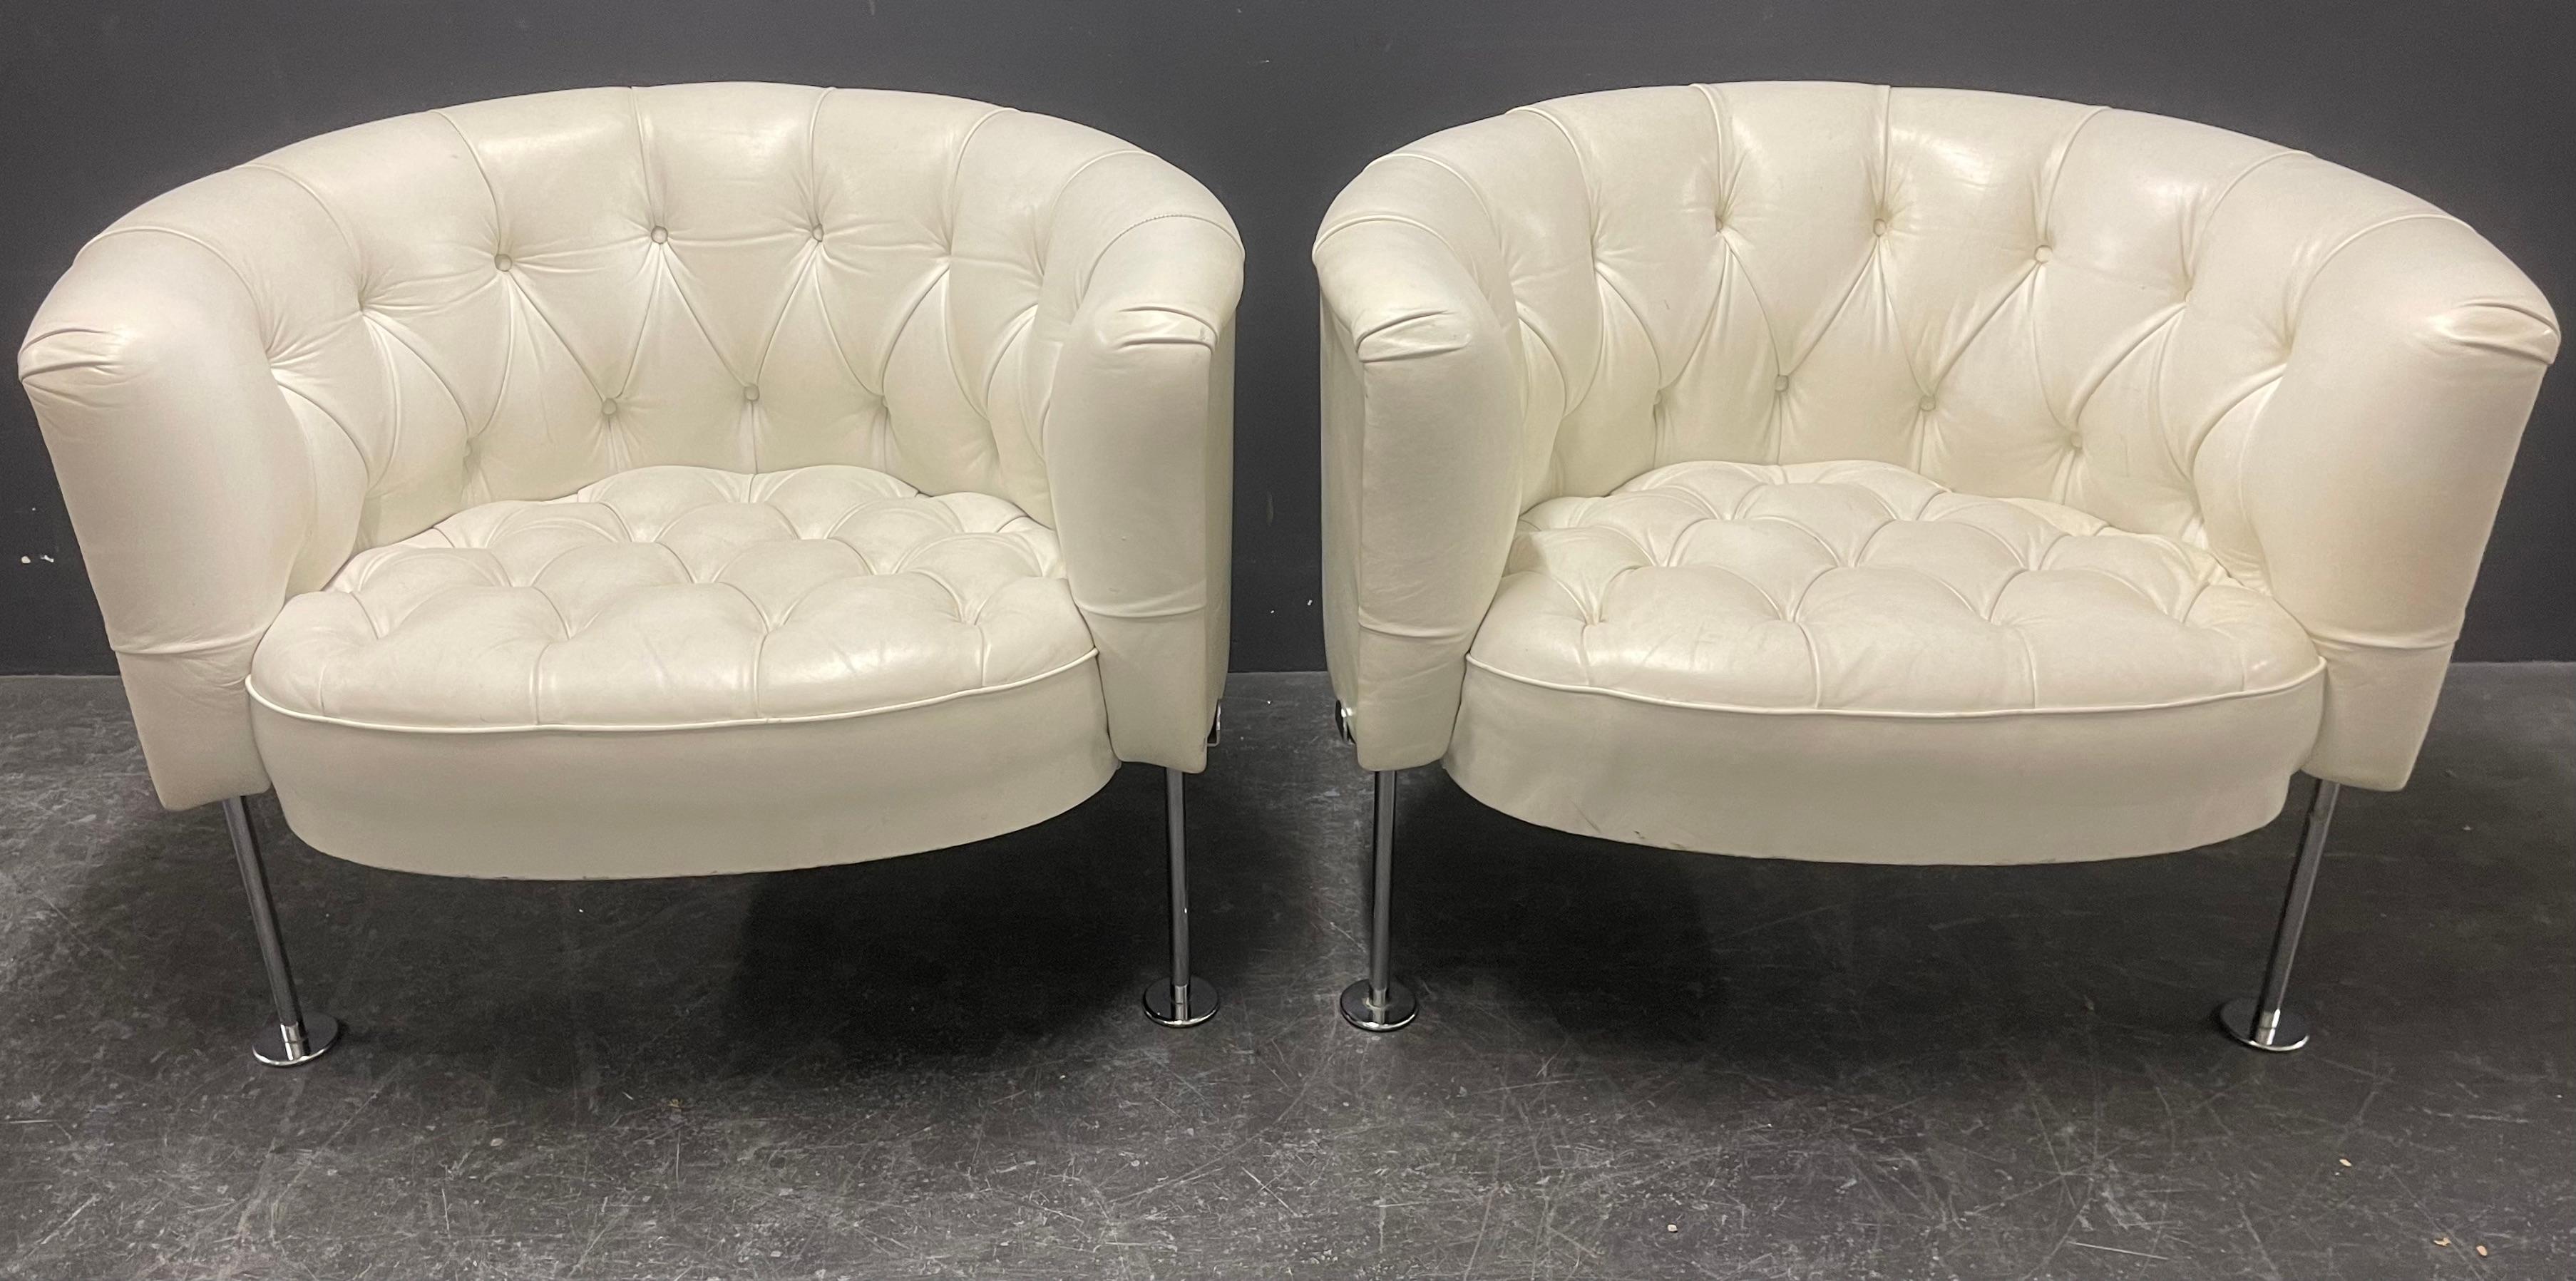 well crafted set of wide and comfy armchairs designed by robert haussmann and manufactured by the most exclusive brand for leather furniture. de sede switzerland.